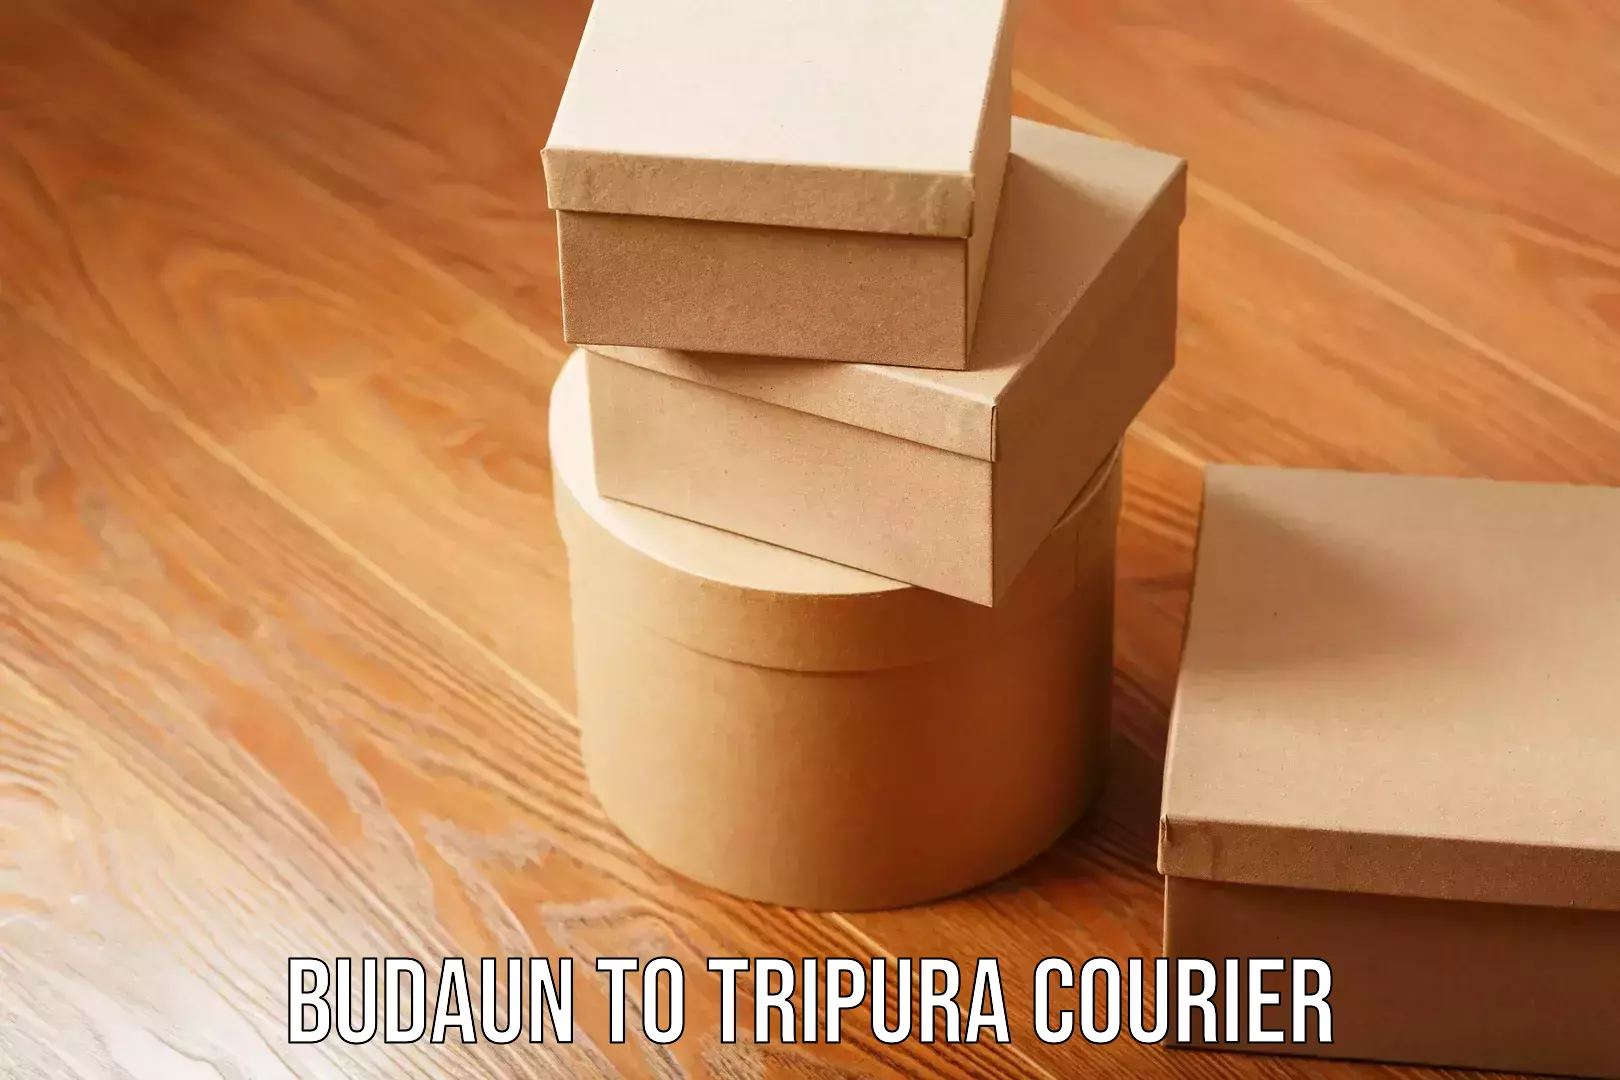 Professional courier services Budaun to Udaipur Tripura